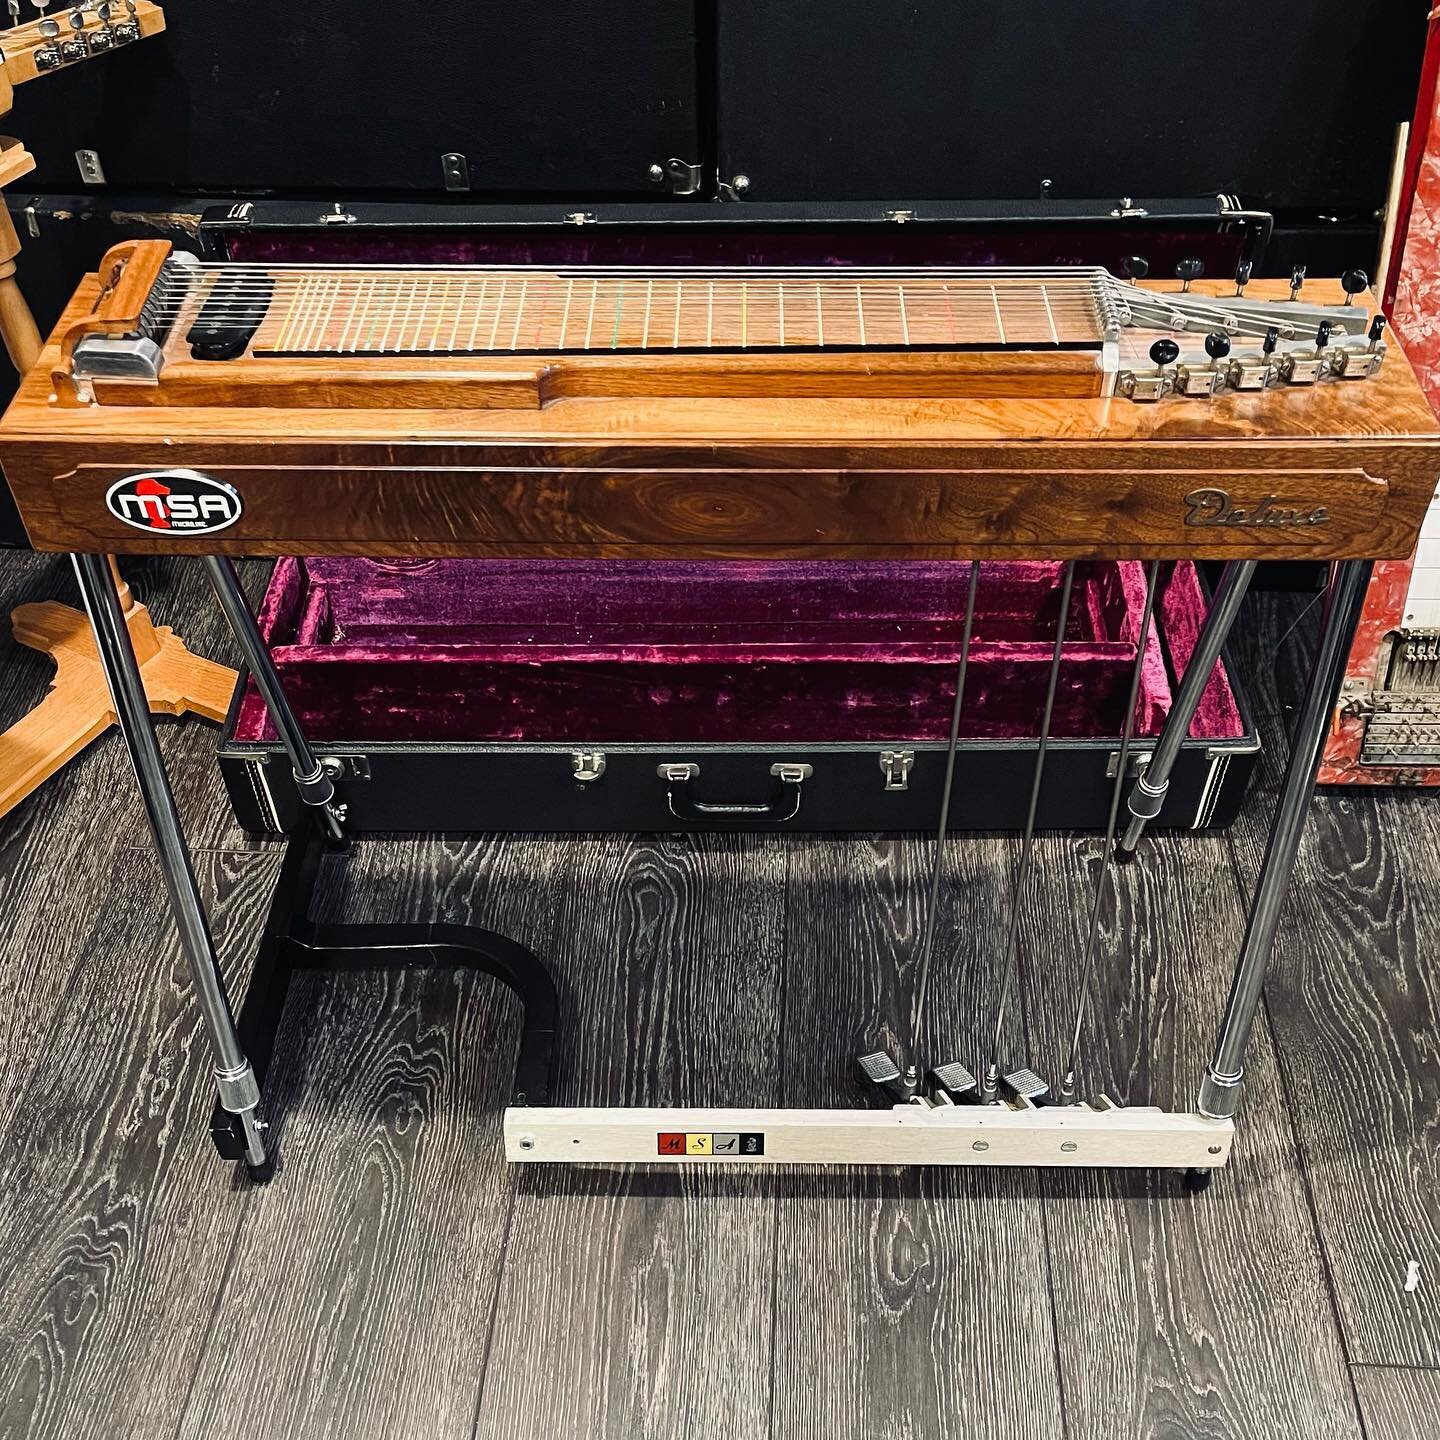 Got back from another Steel Safari. 

Still trying to make heads or tails out of what I picked up. 

A Multikord for parts at best. 

A homemade Electraharp. A really neat eight string Lap steel with its own stand. 

Last but not least&hellip;. A sma